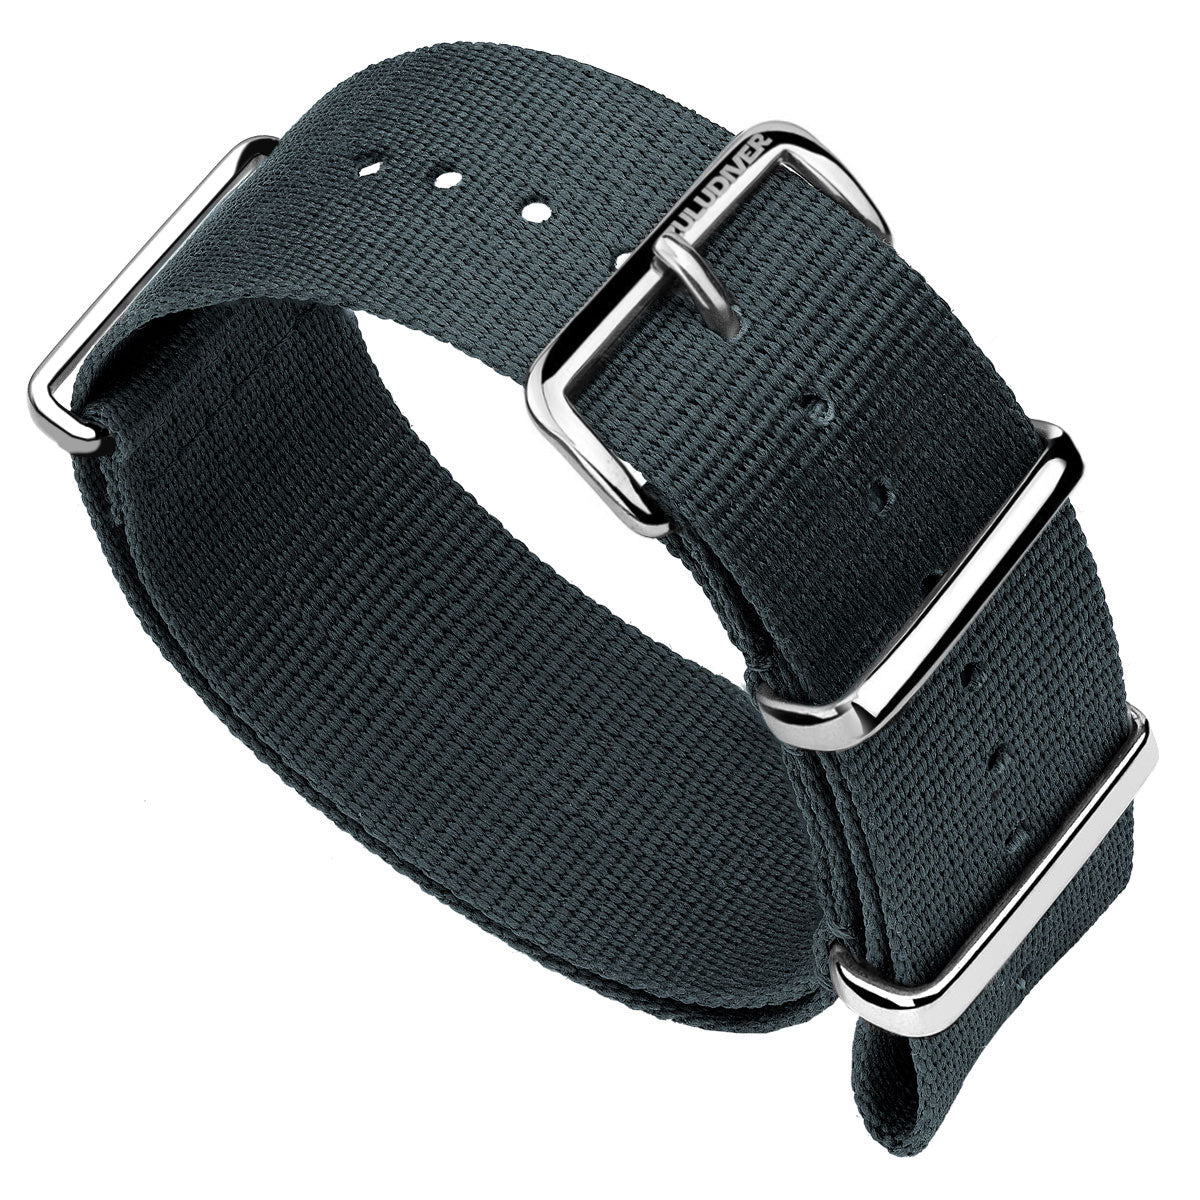 Military NATO watch strap, colour grey, with polished stainless steel hardware